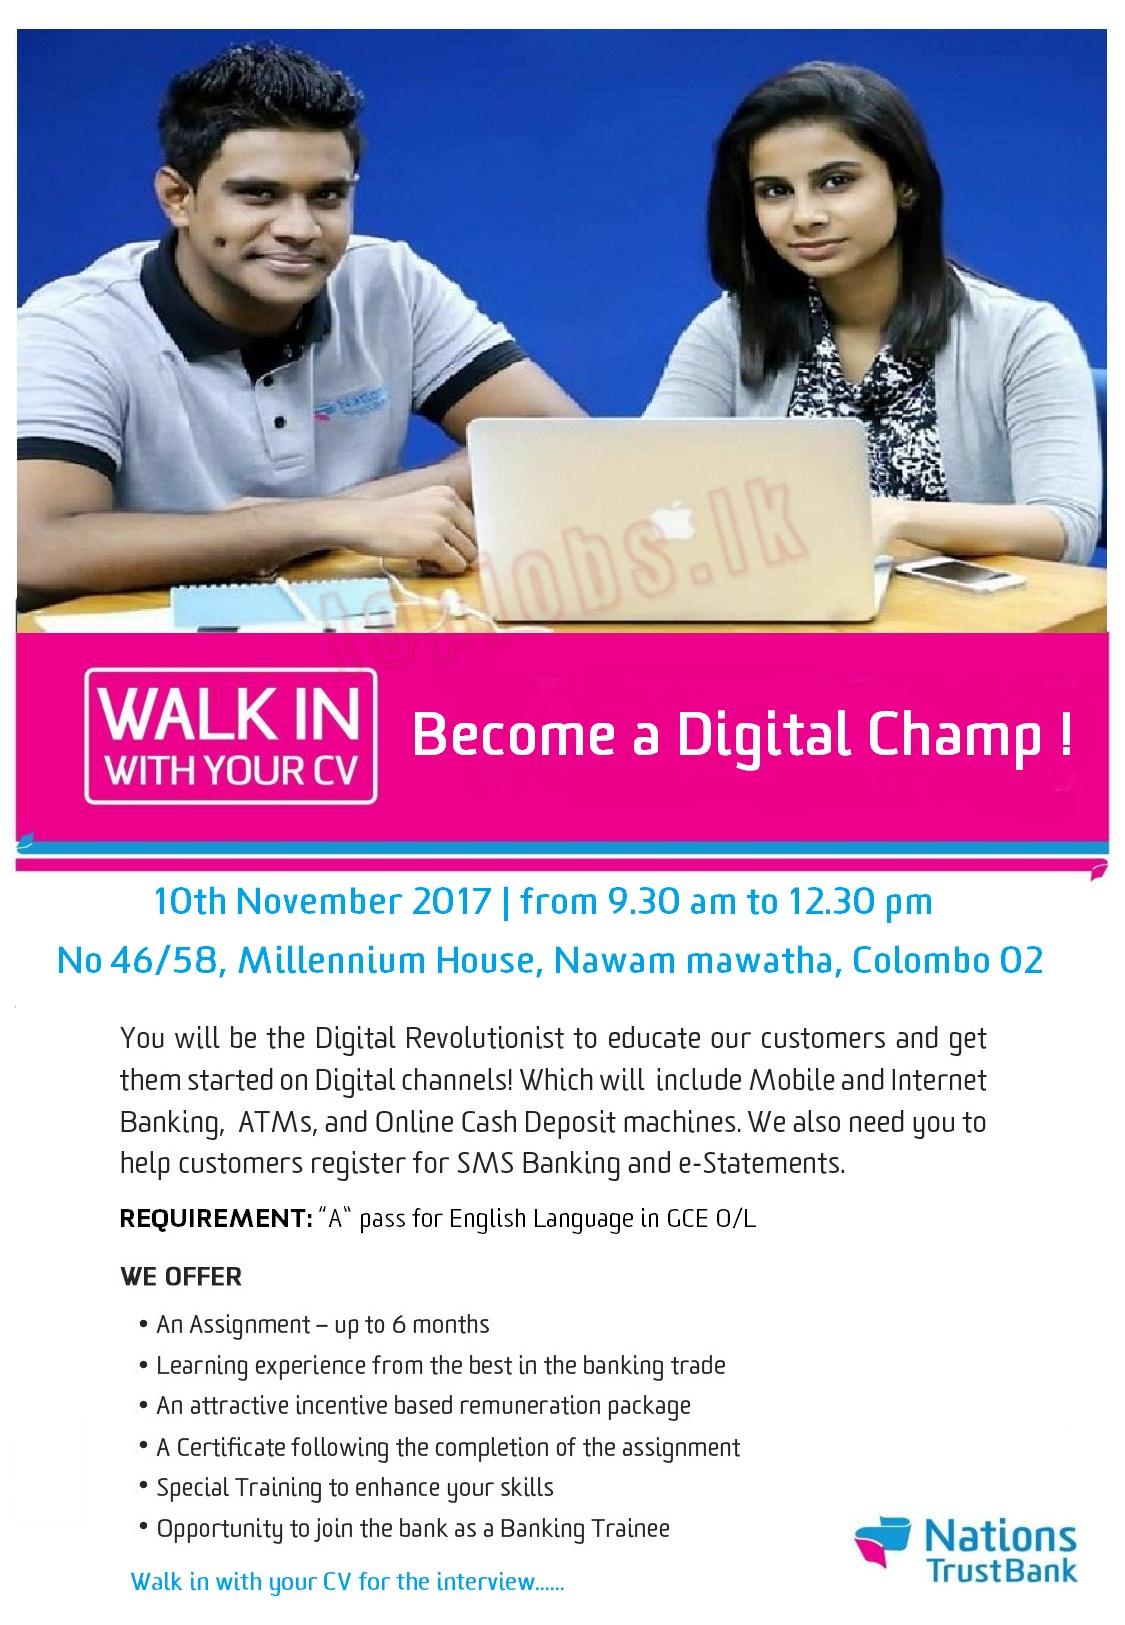 Walk-in Interviews for Digital Champ Vacancies in Nations Trust Bank PLC